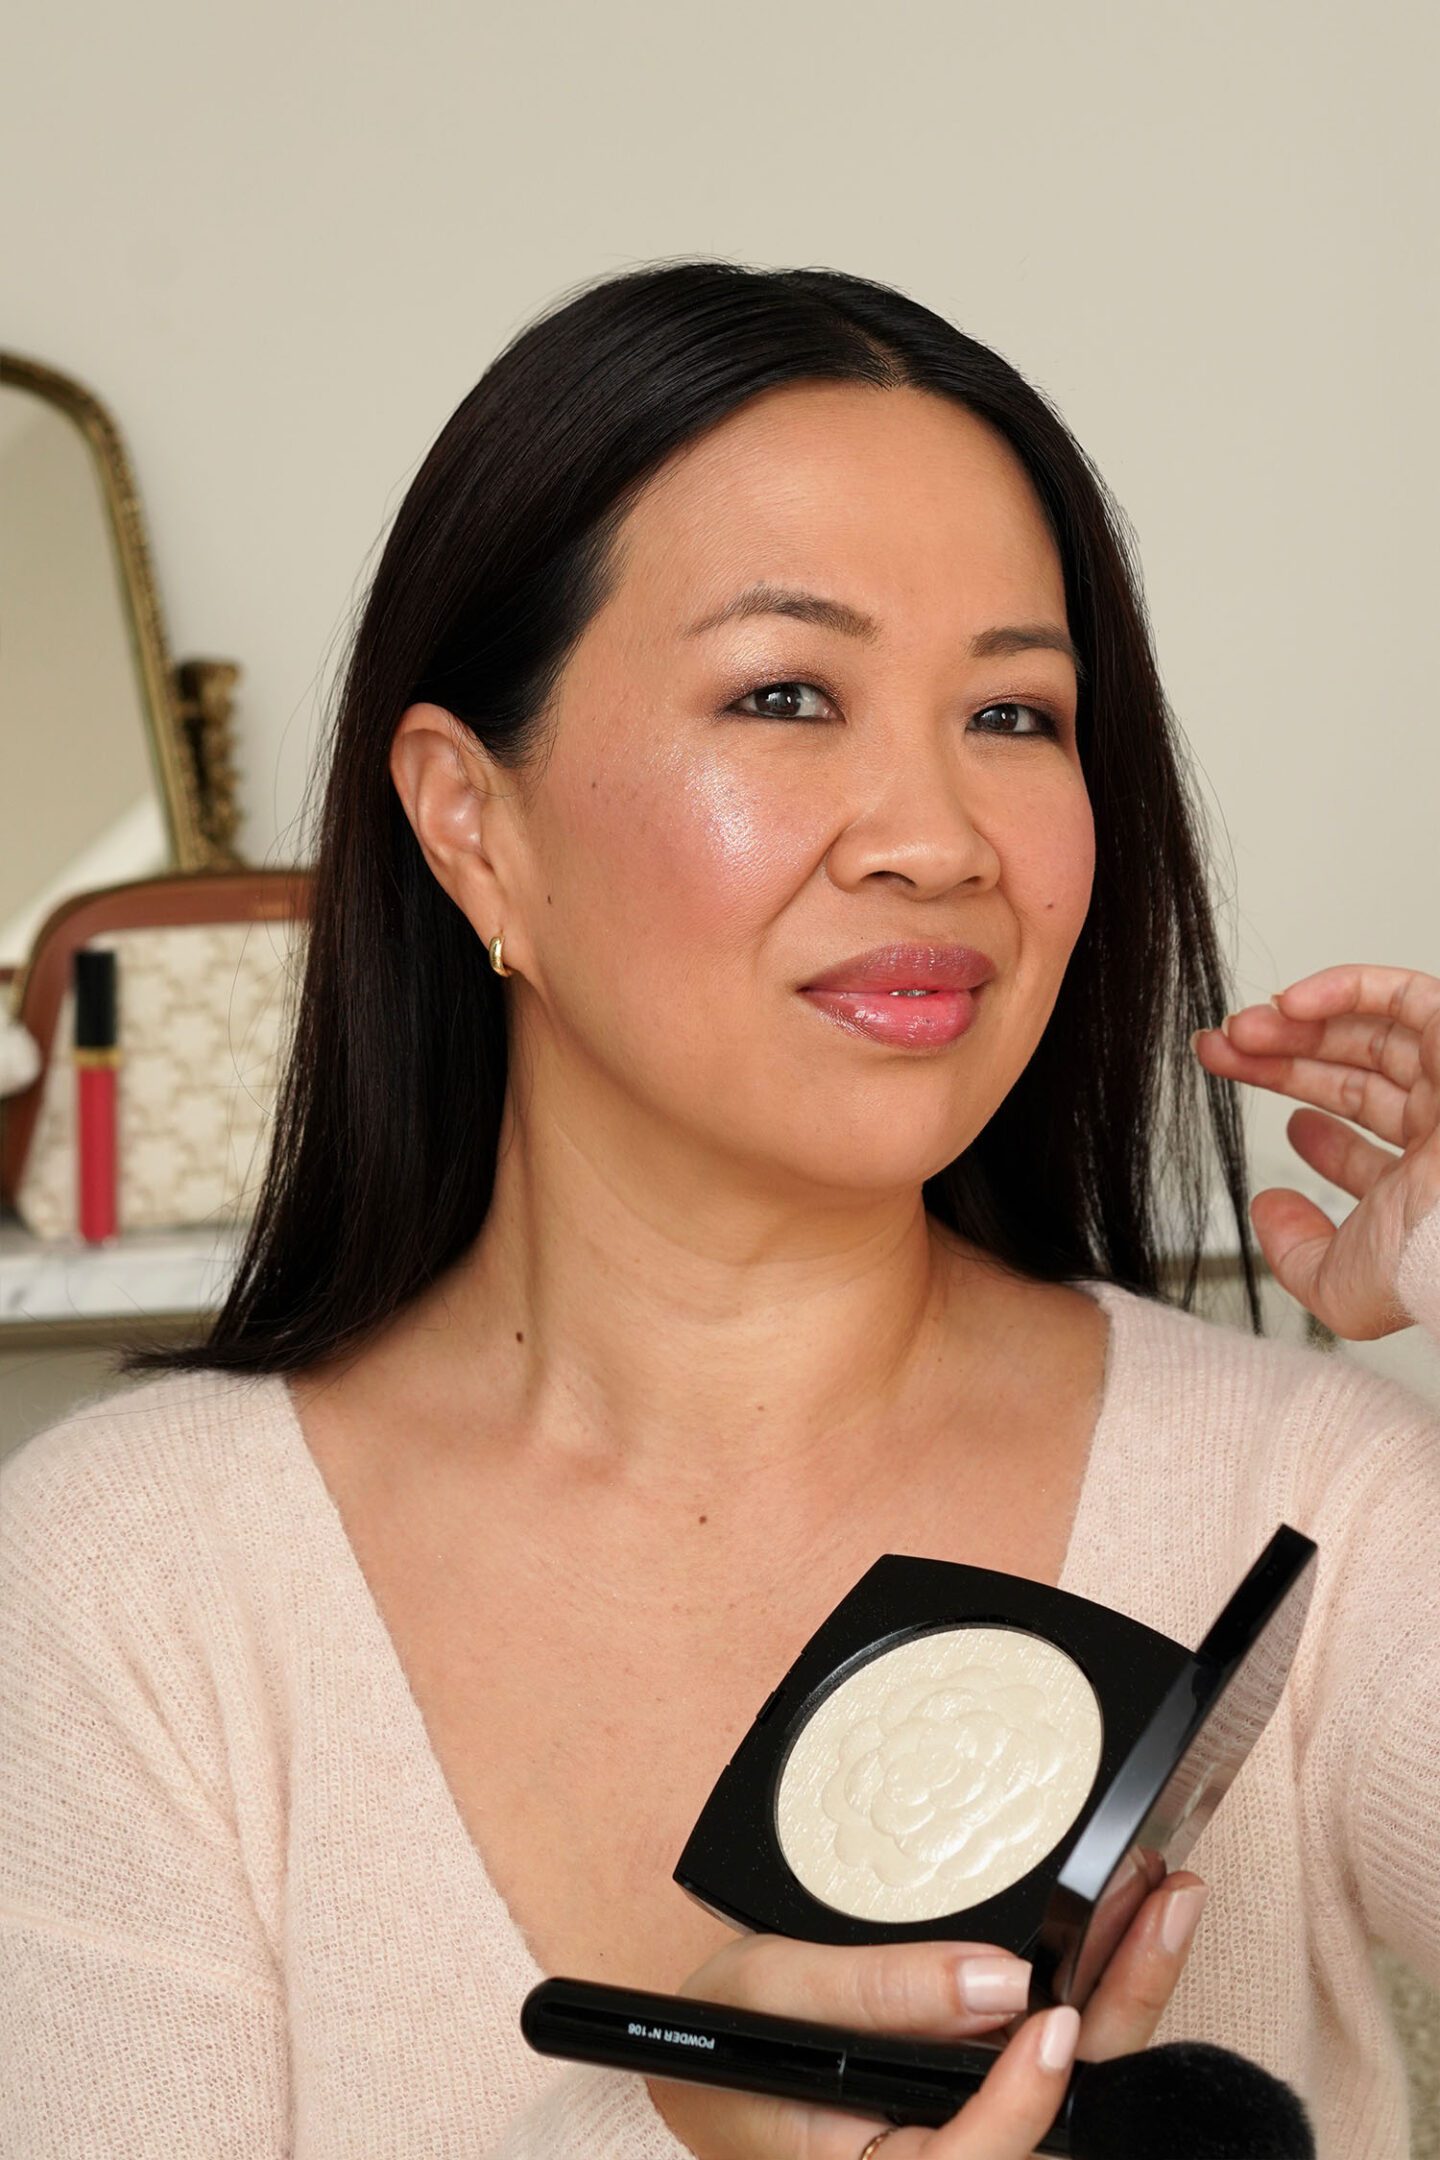 Les Symboles de Chanel Highlighter in Pearly White makeup look